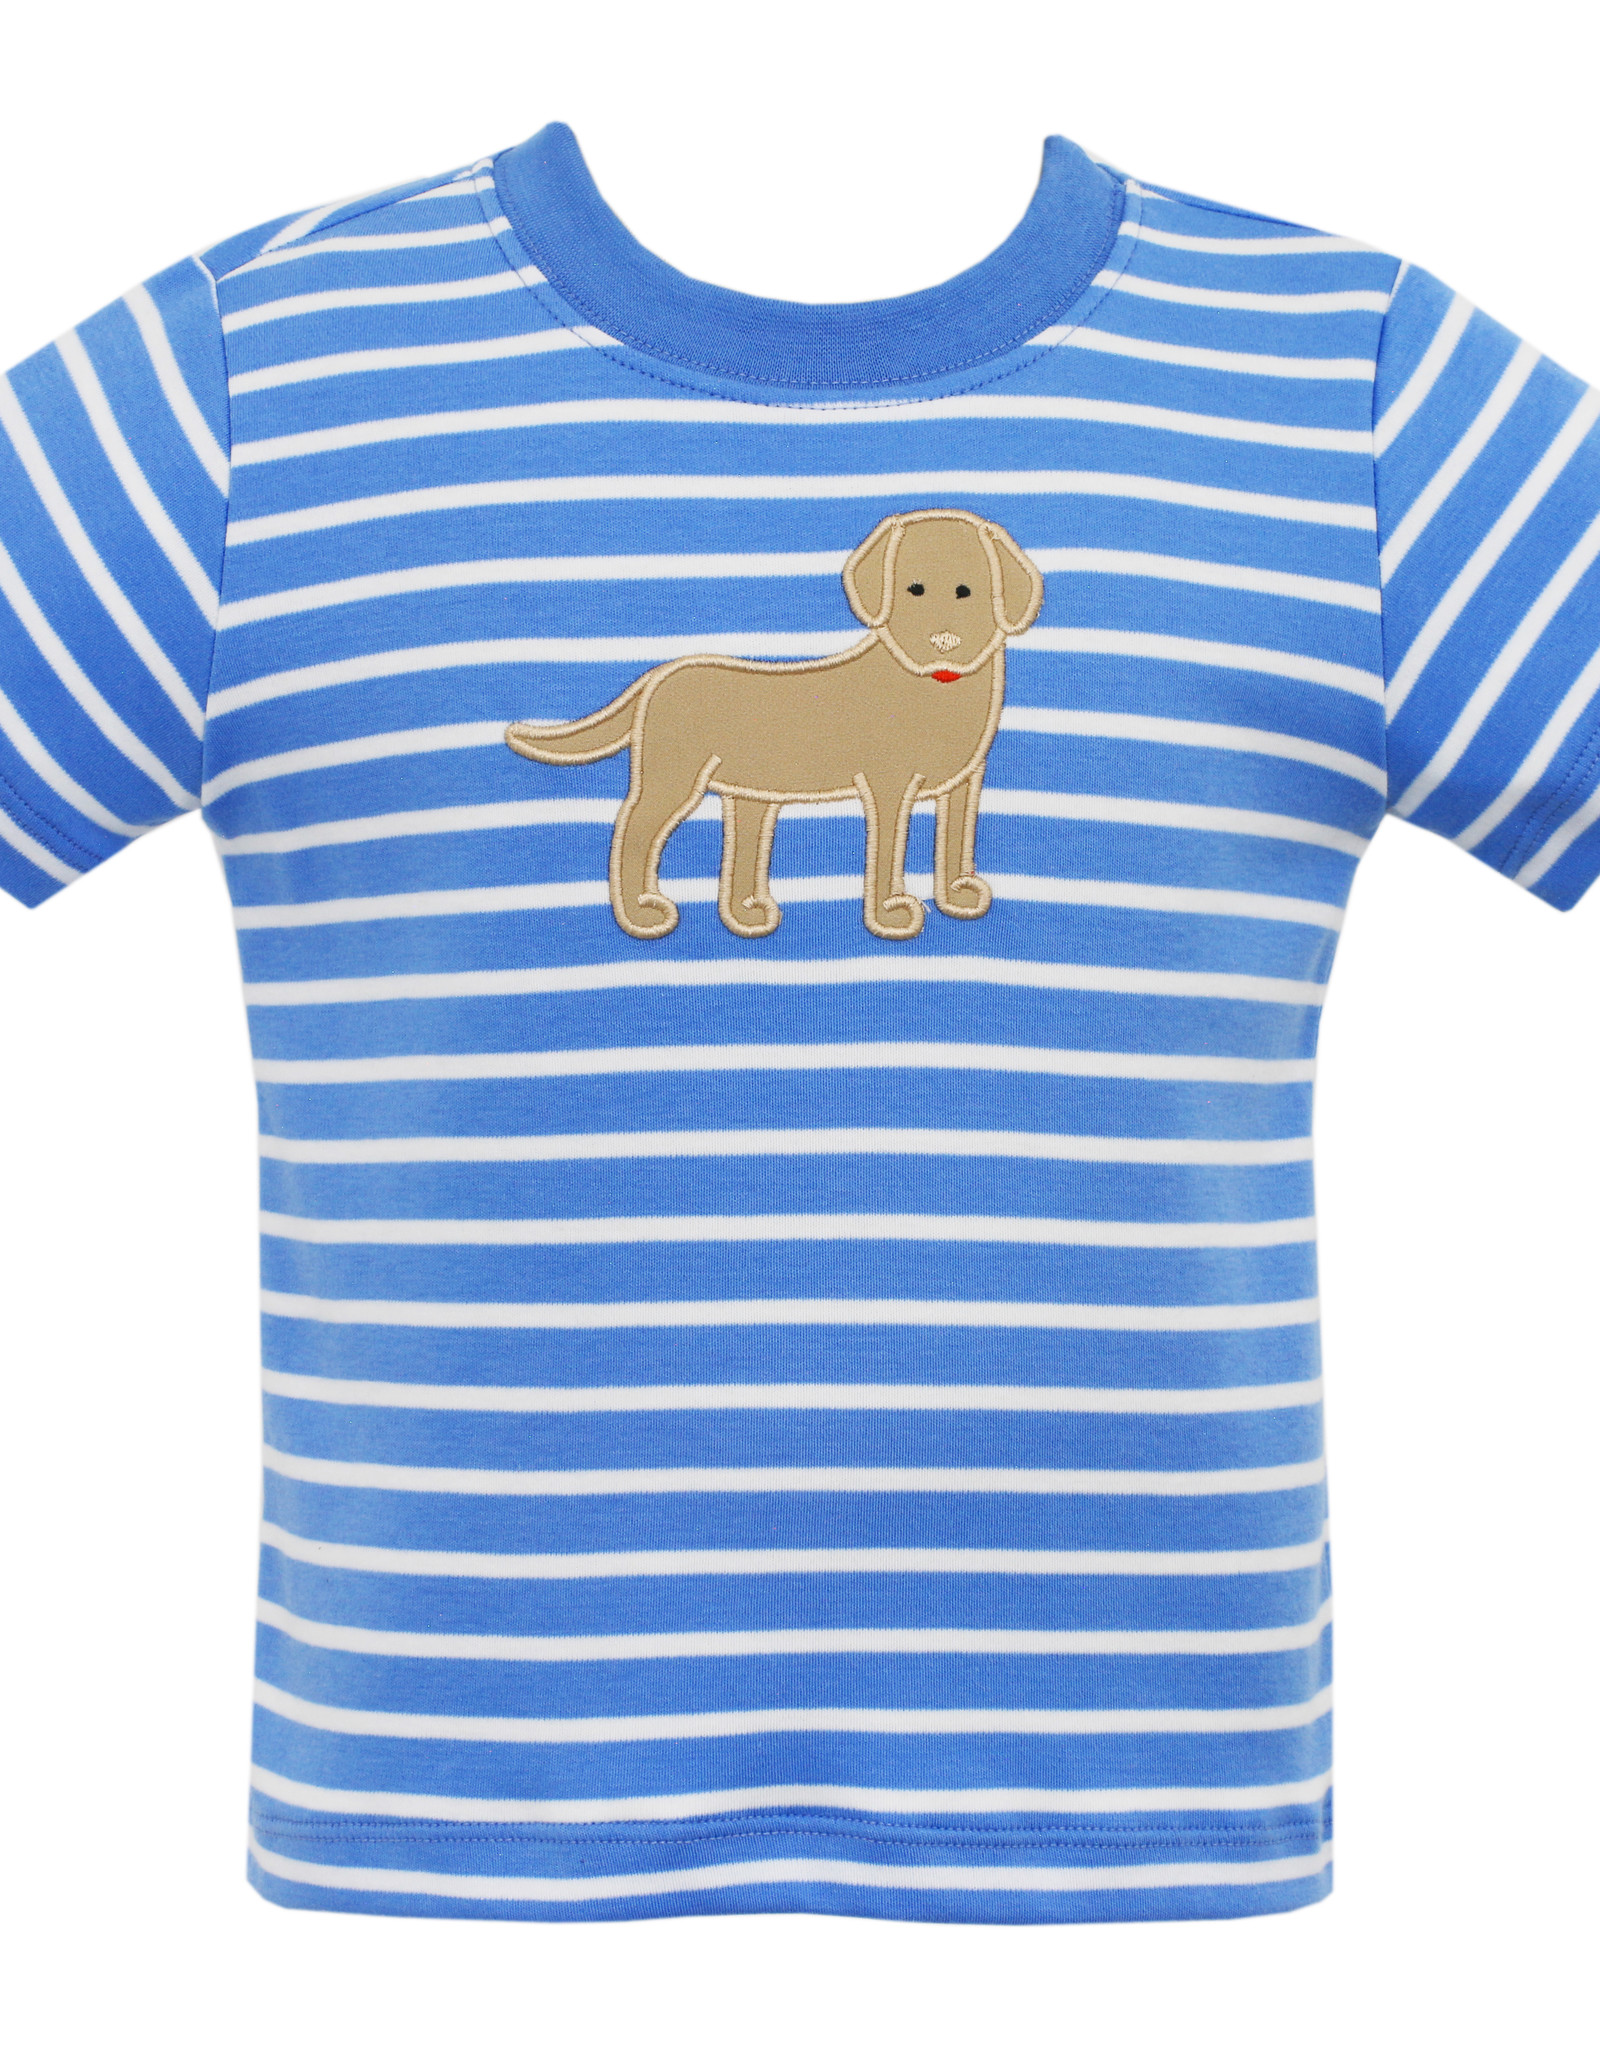 Claire and Charlie LABRADOR -  T-shirt - S/S